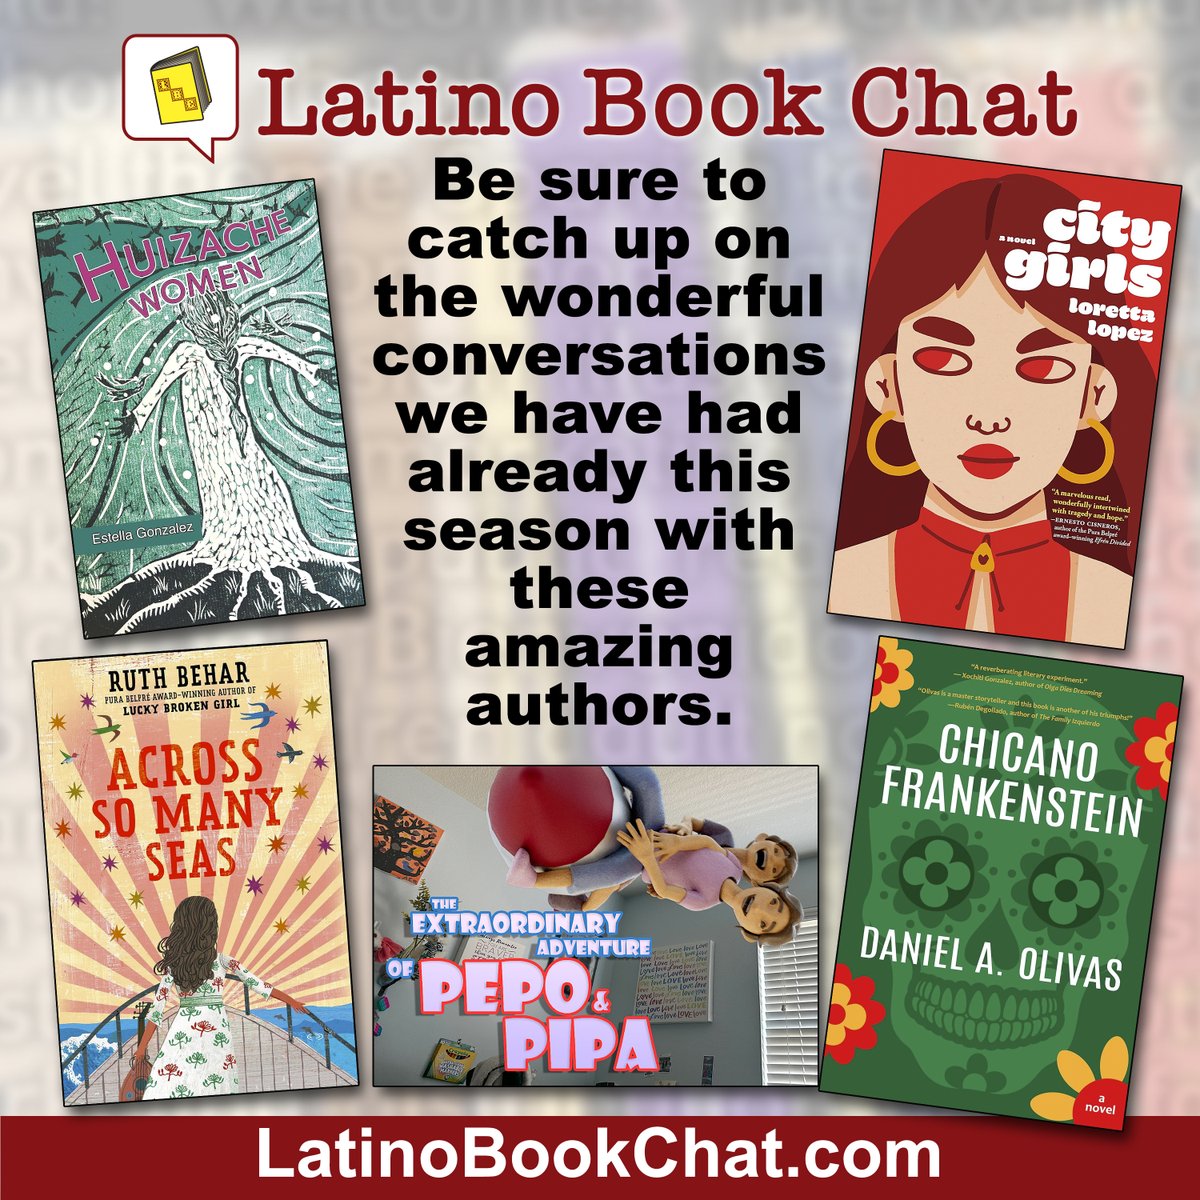 You are cordially invited to listen to these fun chats with the amazing @Estella26845969 @olivasdan @ChicanoWriter @ruthbehar Loretta Lopez and Luis Cayo at LatinoBookChat.com